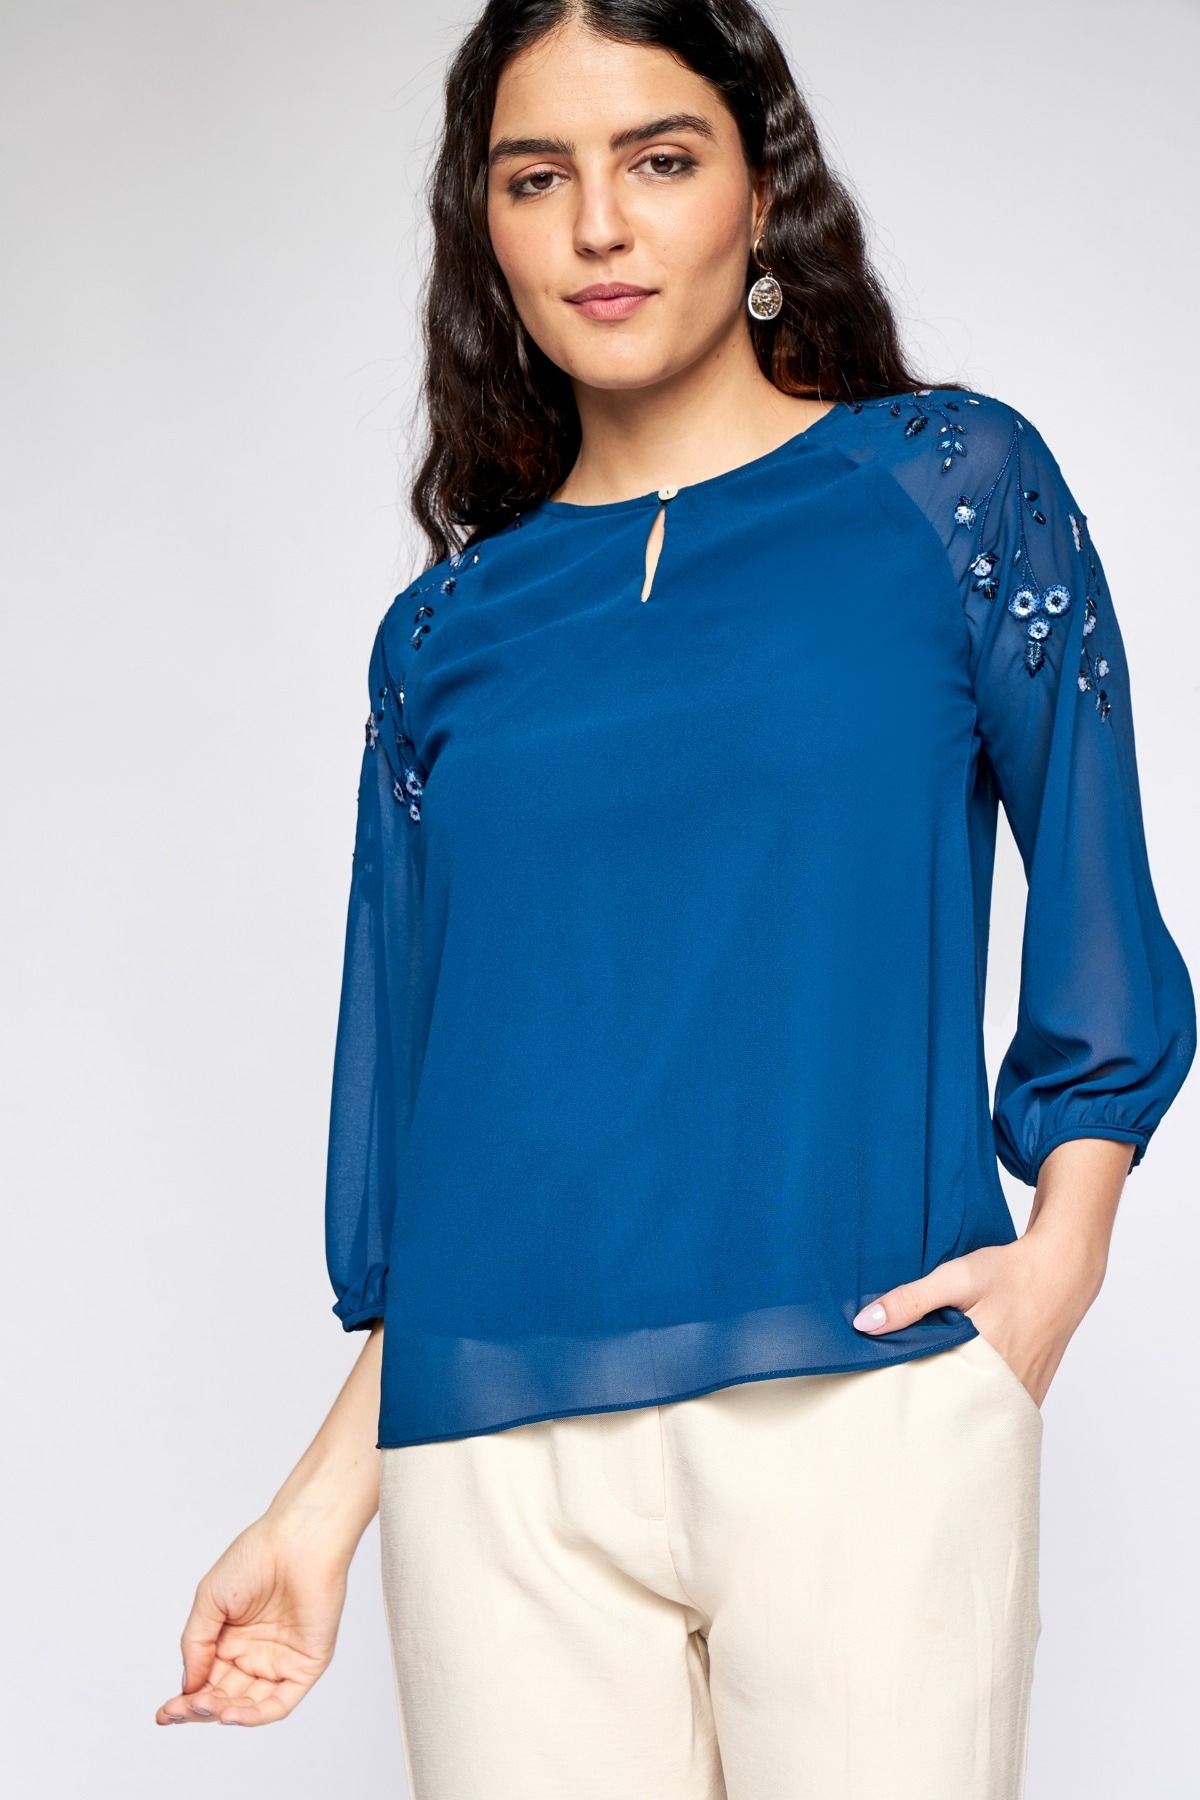 AND | Teal Solid Embellished Top